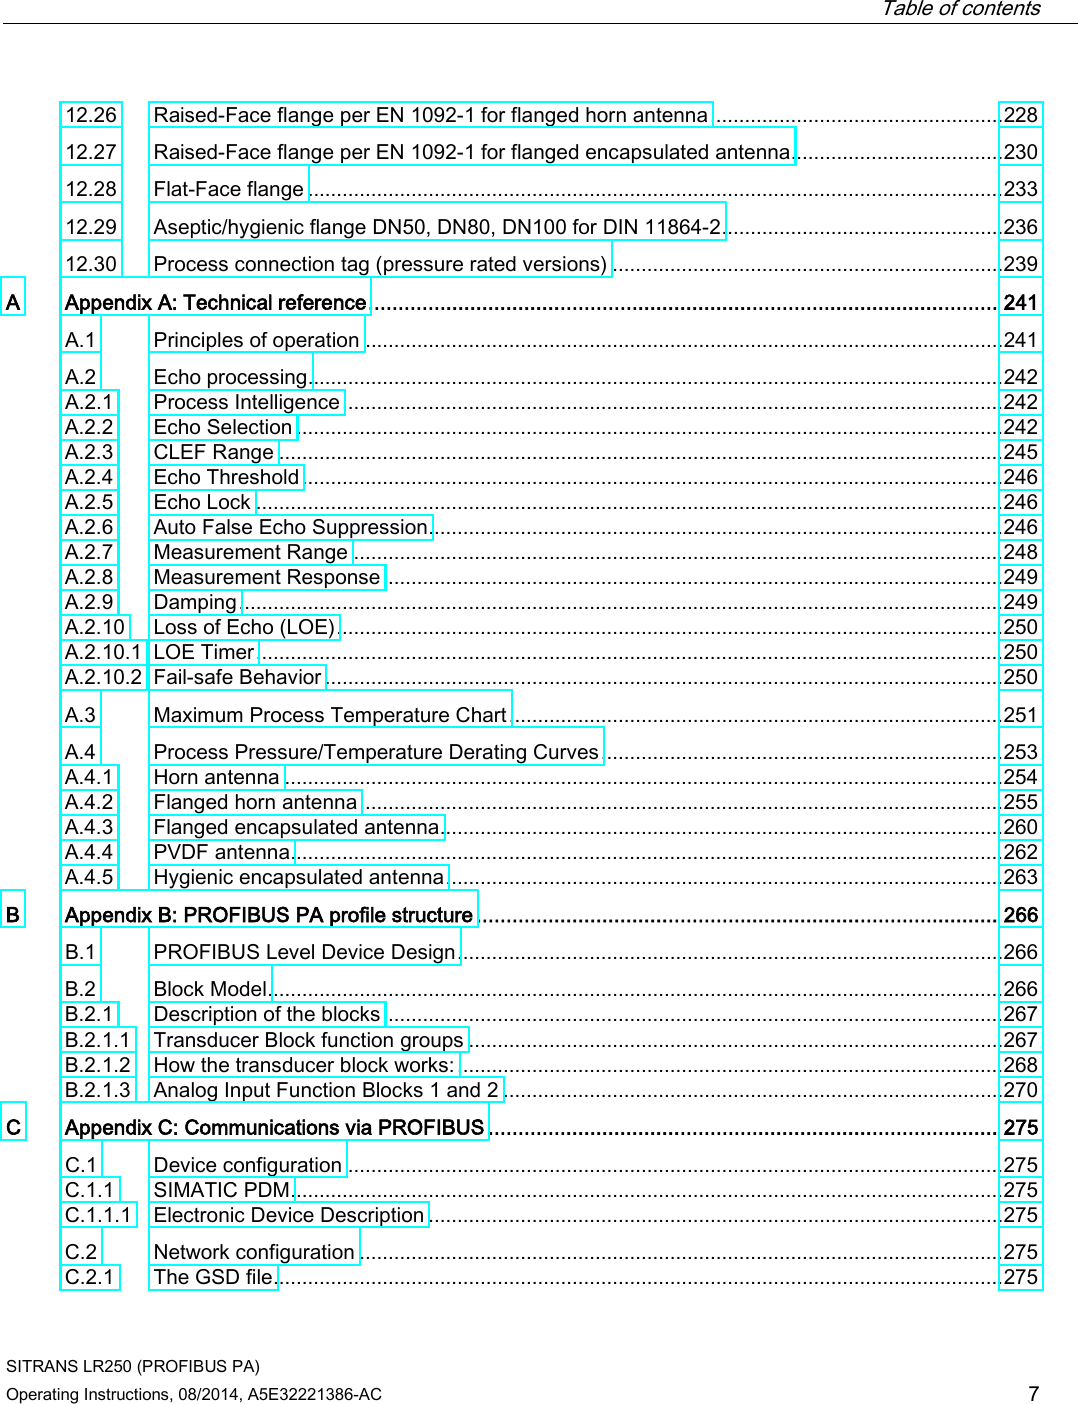  Table of contents   SITRANS LR250 (PROFIBUS PA) Operating Instructions, 08/2014, A5E32221386-AC 7 12.26 Raised-Face flange per EN 1092-1 for flanged horn antenna ................................................... 228 12.27 Raised-Face flange per EN 1092-1 for flanged encapsulated antenna..................................... 230 12.28 Flat-Face flange ......................................................................................................................... 233 12.29 Aseptic/hygienic flange DN50, DN80, DN100 for DIN 11864-2 ................................................. 236 12.30 Process connection tag (pressure rated versions) .................................................................... 239 A  Appendix A: Technical reference ......................................................................................................... 241 A.1 Principles of operation ............................................................................................................... 241 A.2 Echo processing......................................................................................................................... 242 A.2.1 Process Intelligence ................................................................................................................... 242 A.2.2 Echo Selection ........................................................................................................................... 242 A.2.3 CLEF Range .............................................................................................................................. 245 A.2.4 Echo Threshold .......................................................................................................................... 246 A.2.5 Echo Lock .................................................................................................................................. 246 A.2.6 Auto False Echo Suppression .................................................................................................... 246 A.2.7 Measurement Range ................................................................................................................. 248 A.2.8 Measurement Response ............................................................................................................ 249 A.2.9 Damping ..................................................................................................................................... 249 A.2.10 Loss of Echo (LOE) .................................................................................................................... 250 A.2.10.1 LOE Timer .................................................................................................................................. 250 A.2.10.2 Fail-safe Behavior ...................................................................................................................... 250 A.3 Maximum Process Temperature Chart ...................................................................................... 251 A.4 Process Pressure/Temperature Derating Curves ...................................................................... 253 A.4.1 Horn antenna ............................................................................................................................. 254 A.4.2 Flanged horn antenna ................................................................................................................ 255 A.4.3 Flanged encapsulated antenna .................................................................................................. 260 A.4.4 PVDF antenna............................................................................................................................ 262 A.4.5 Hygienic encapsulated antenna ................................................................................................. 263 B  Appendix B: PROFIBUS PA profile structure ....................................................................................... 266 B.1 PROFIBUS Level Device Design ............................................................................................... 266 B.2 Block Model ................................................................................................................................ 266 B.2.1 Description of the blocks ............................................................................................................ 267 B.2.1.1 Transducer Block function groups ............................................................................................. 267 B.2.1.2 How the transducer block works: ............................................................................................... 268 B.2.1.3 Analog Input Function Blocks 1 and 2 ....................................................................................... 270 C  Appendix C: Communications via PROFIBUS ..................................................................................... 275 C.1 Device configuration .................................................................................................................. 275 C.1.1 SIMATIC PDM ............................................................................................................................ 275 C.1.1.1 Electronic Device Description .................................................................................................... 275 C.2 Network configuration ................................................................................................................ 275 C.2.1 The GSD file ............................................................................................................................... 275 